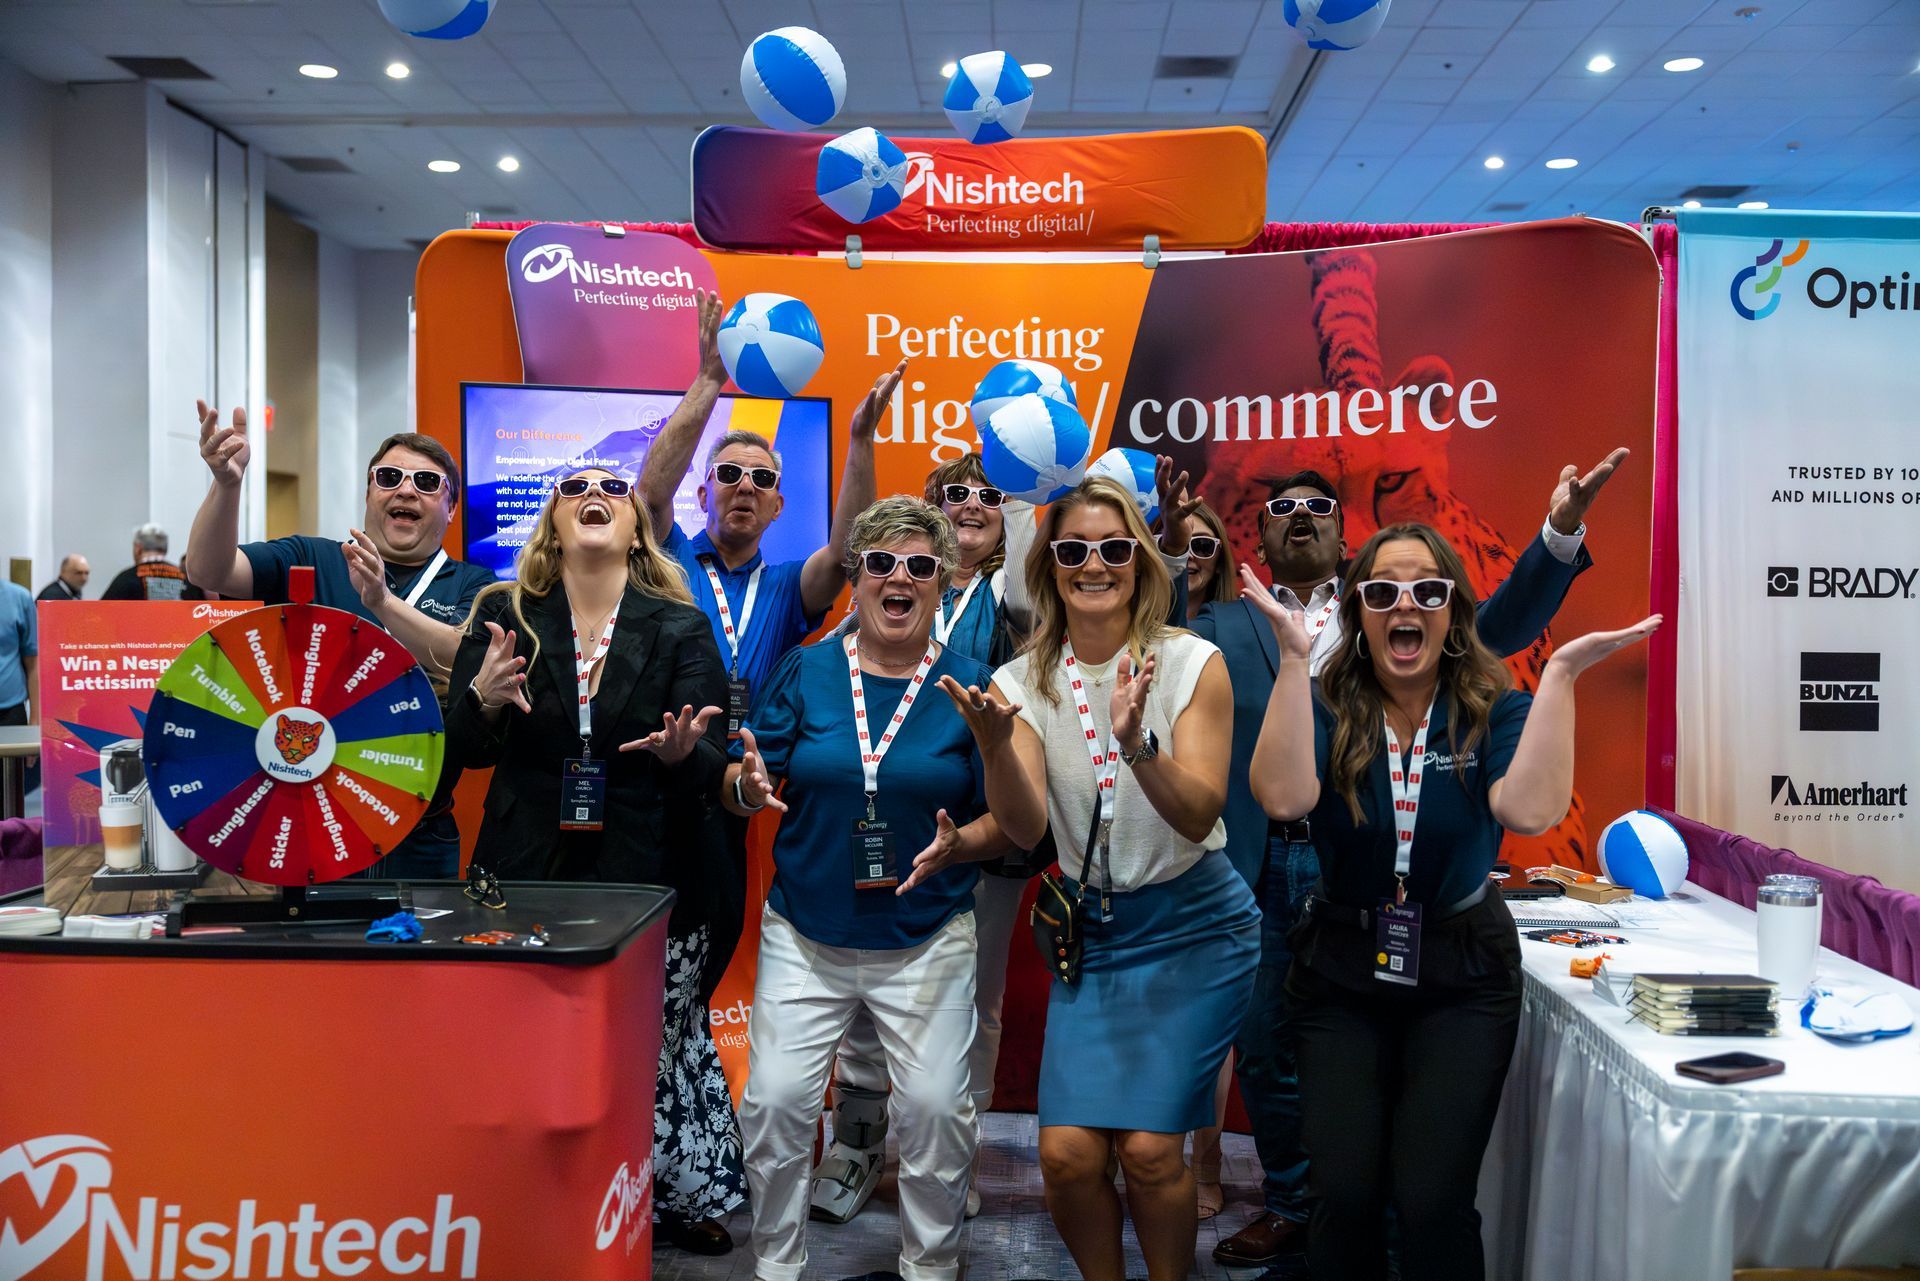 Nishtech booth featuring nine very happy men and women, all wearing sunglasses, tossing blue and white balls in the air.